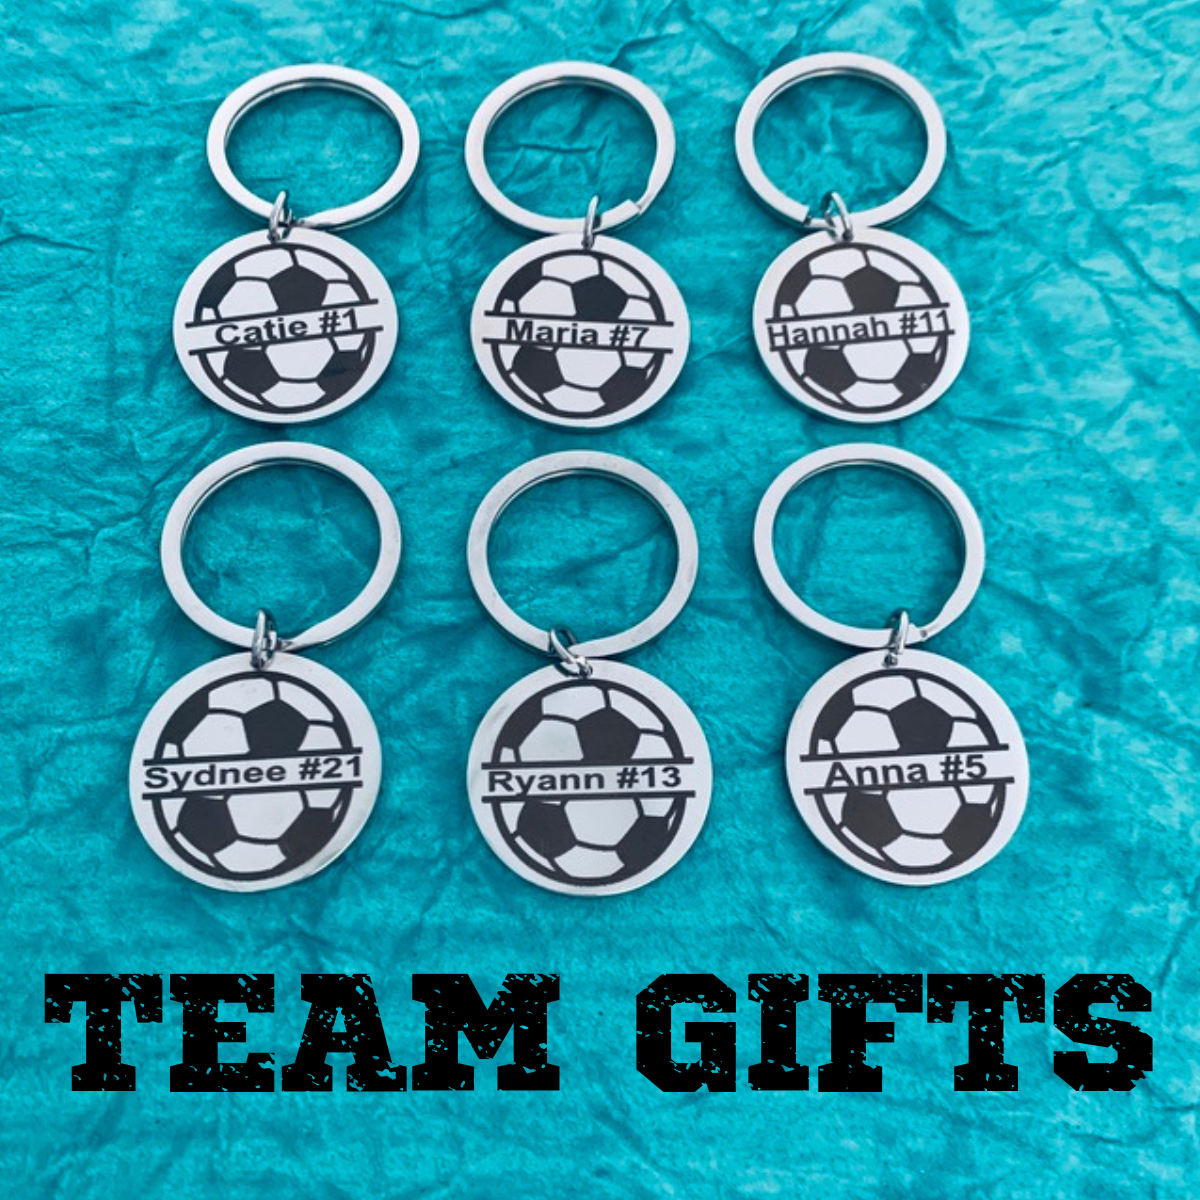 Personalized Engraved Soccer Keychain